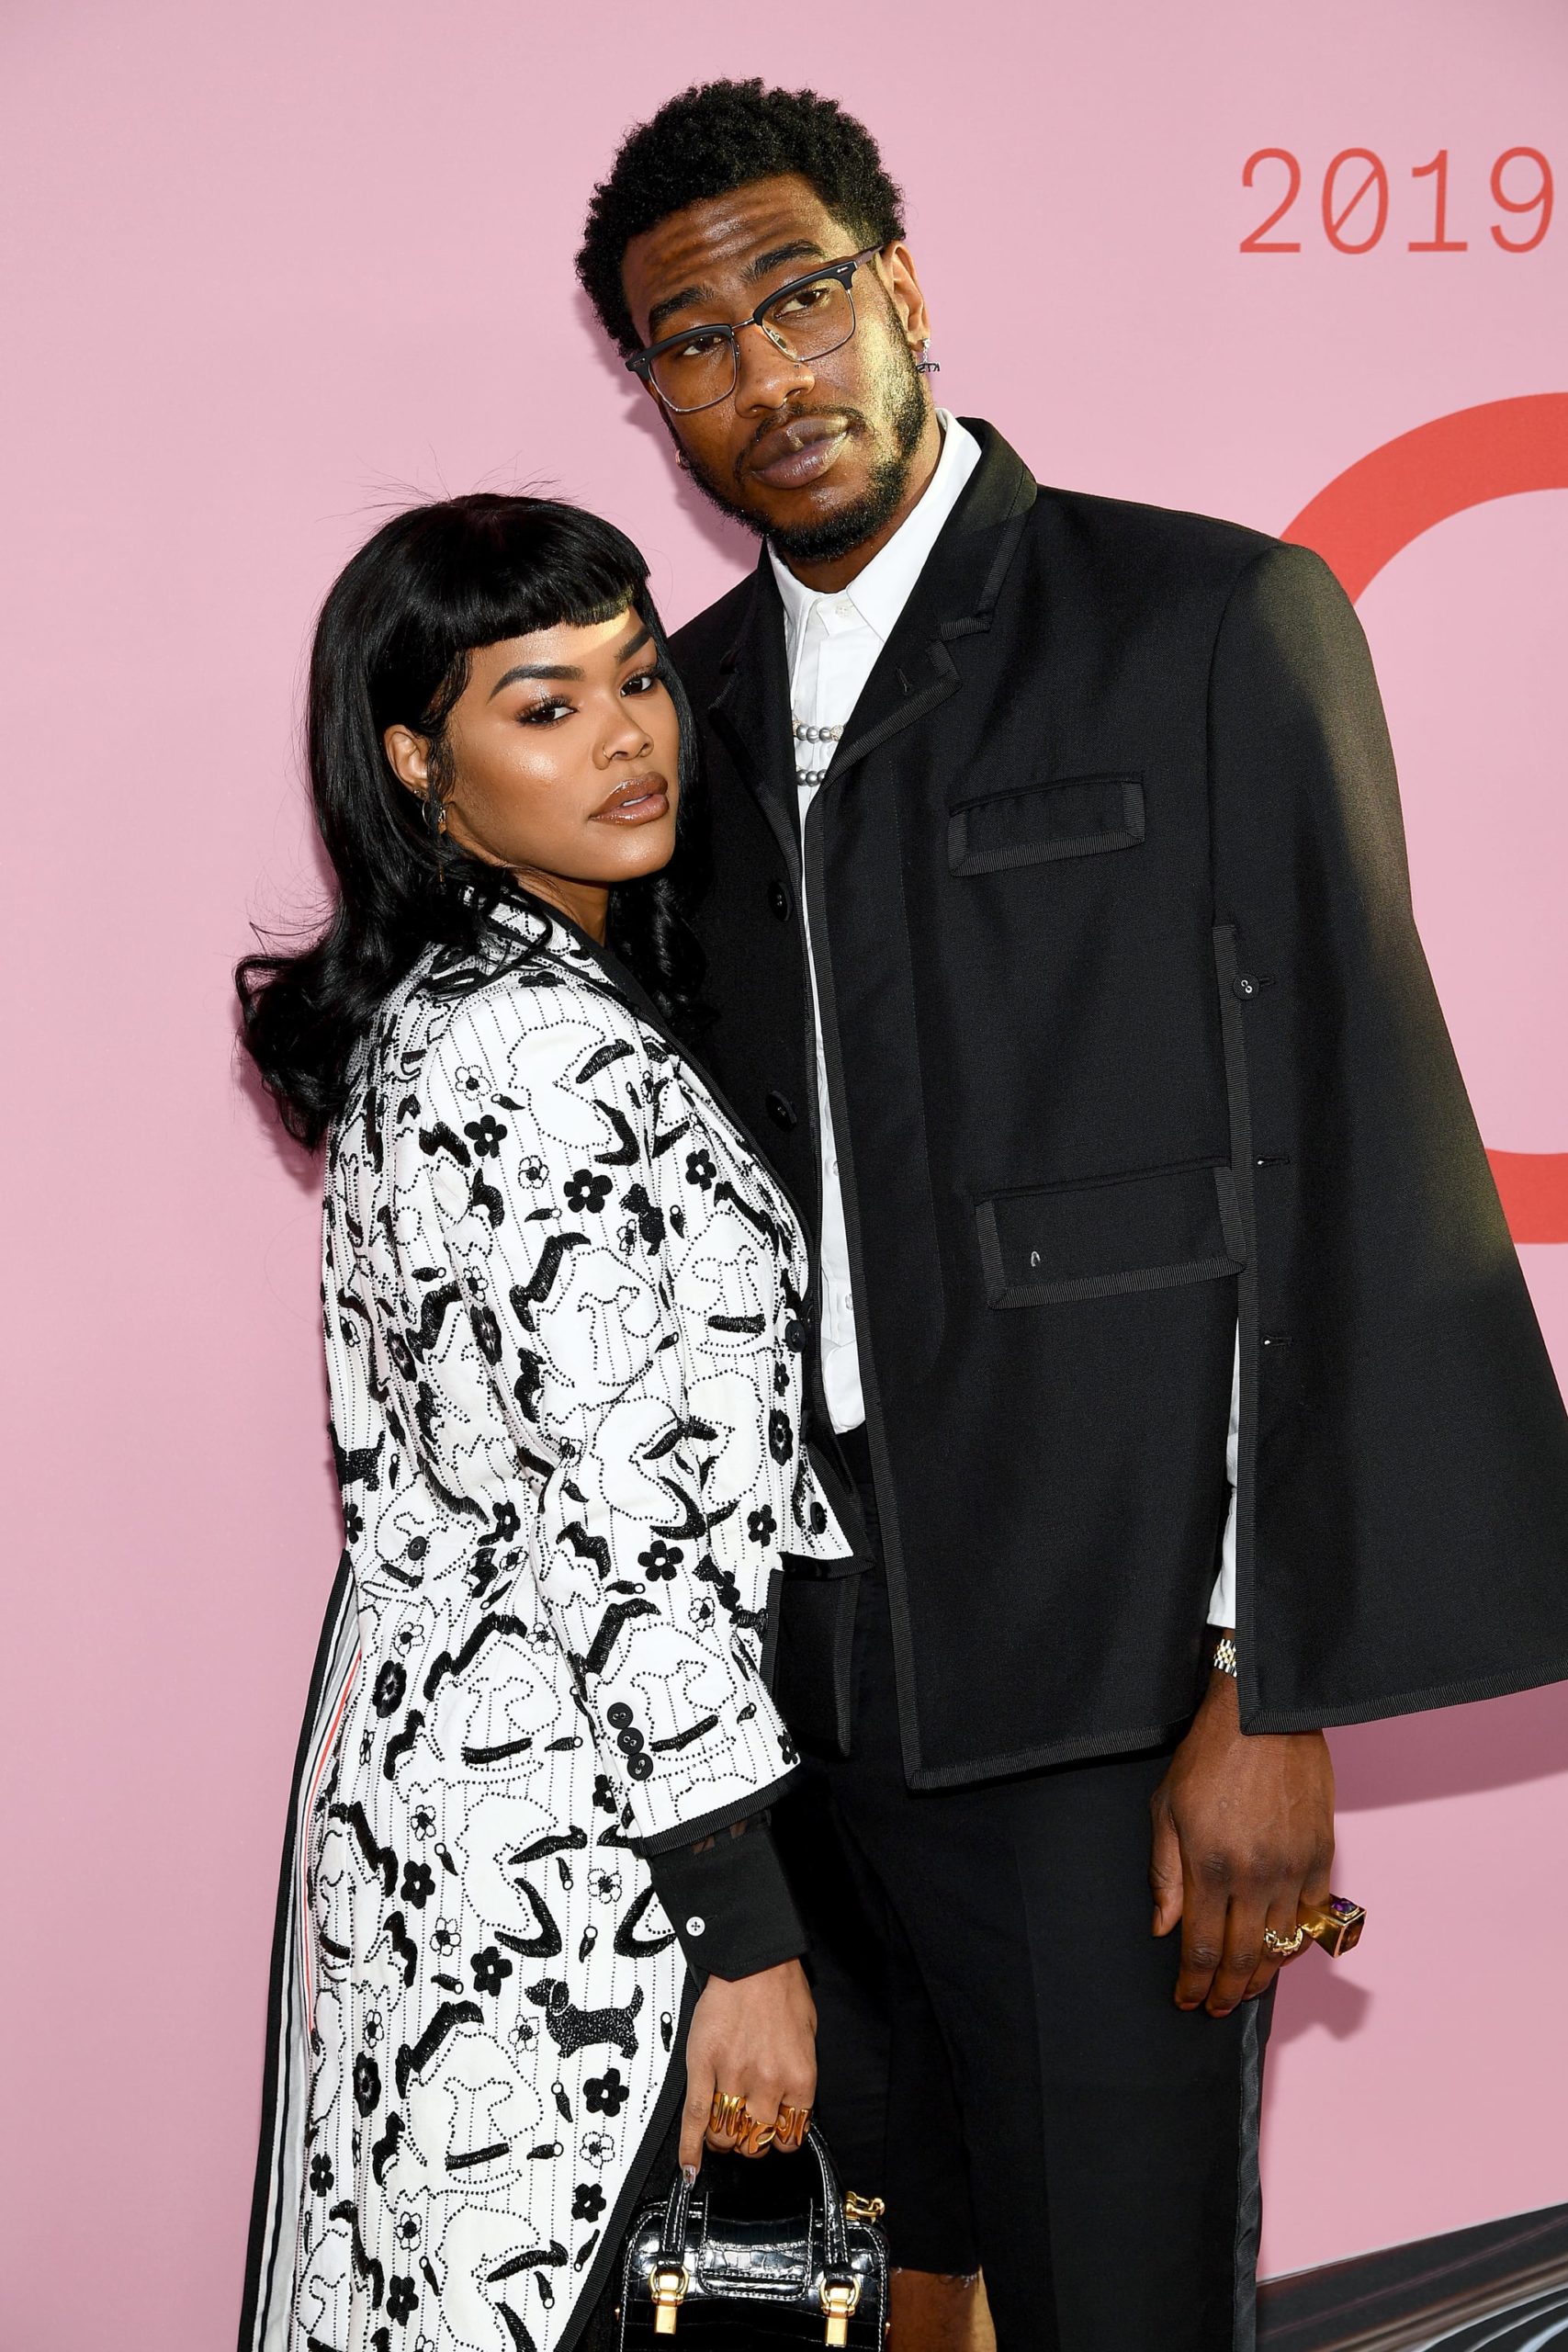 NEW YORK, NEW YORK - JUNE 03: Teyana Taylor and Iman Shumpert attend the CFDA Fashion Awards at the Brooklyn Museum of Art on June 03, 2019 in New York City. (Photo by Dimitrios Kambouris/Getty Images)